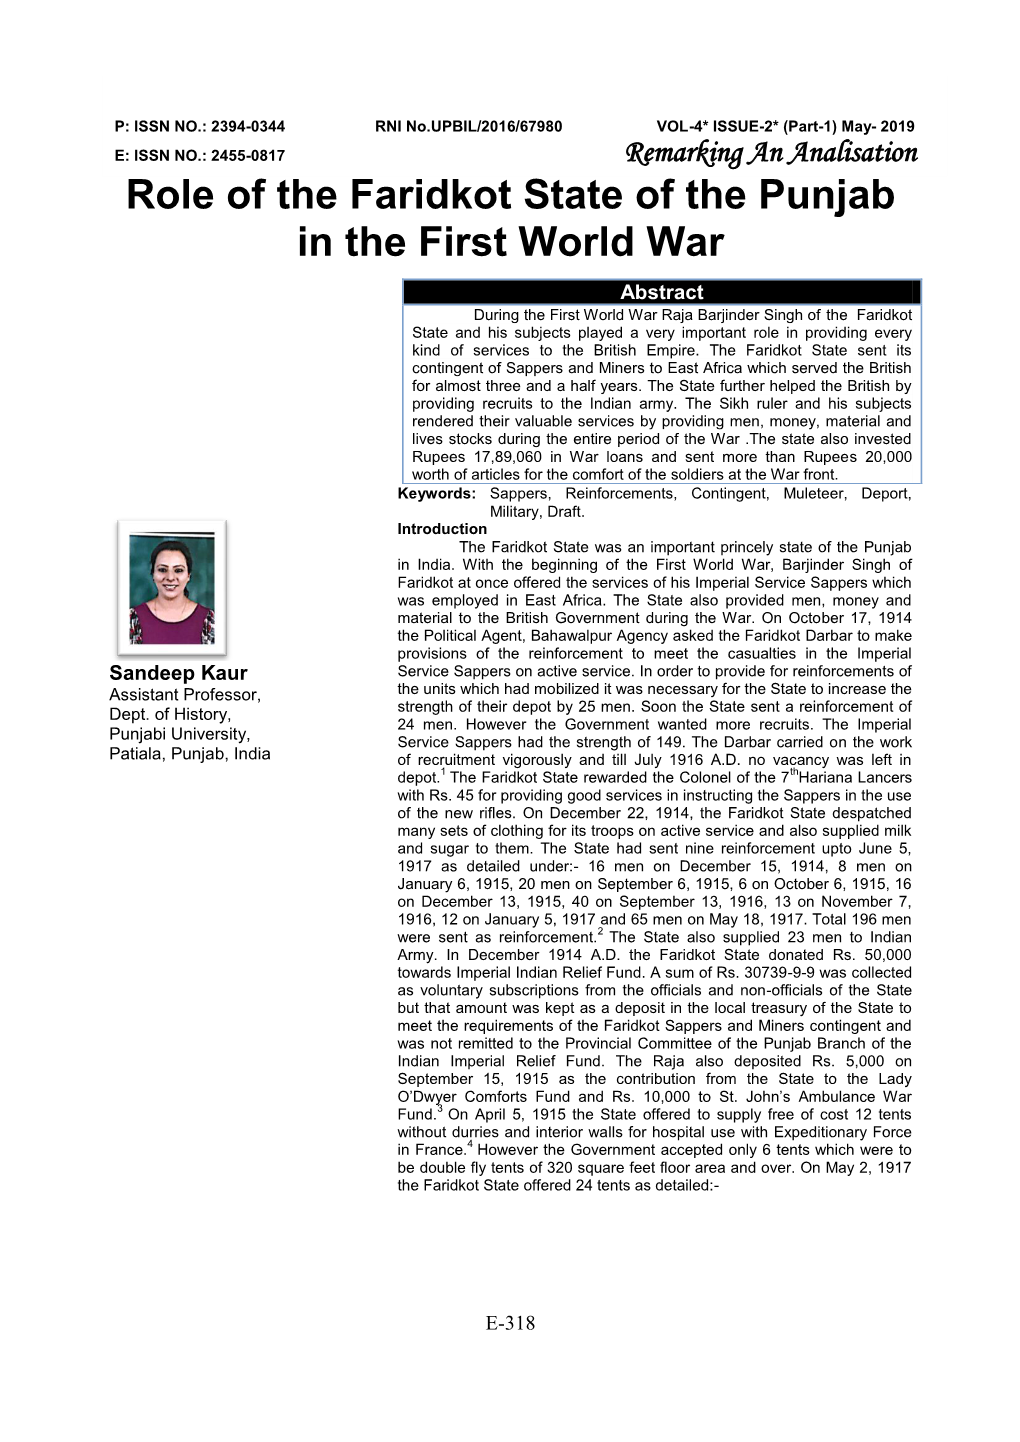 Role of the Faridkot State of the Punjab in the First World War